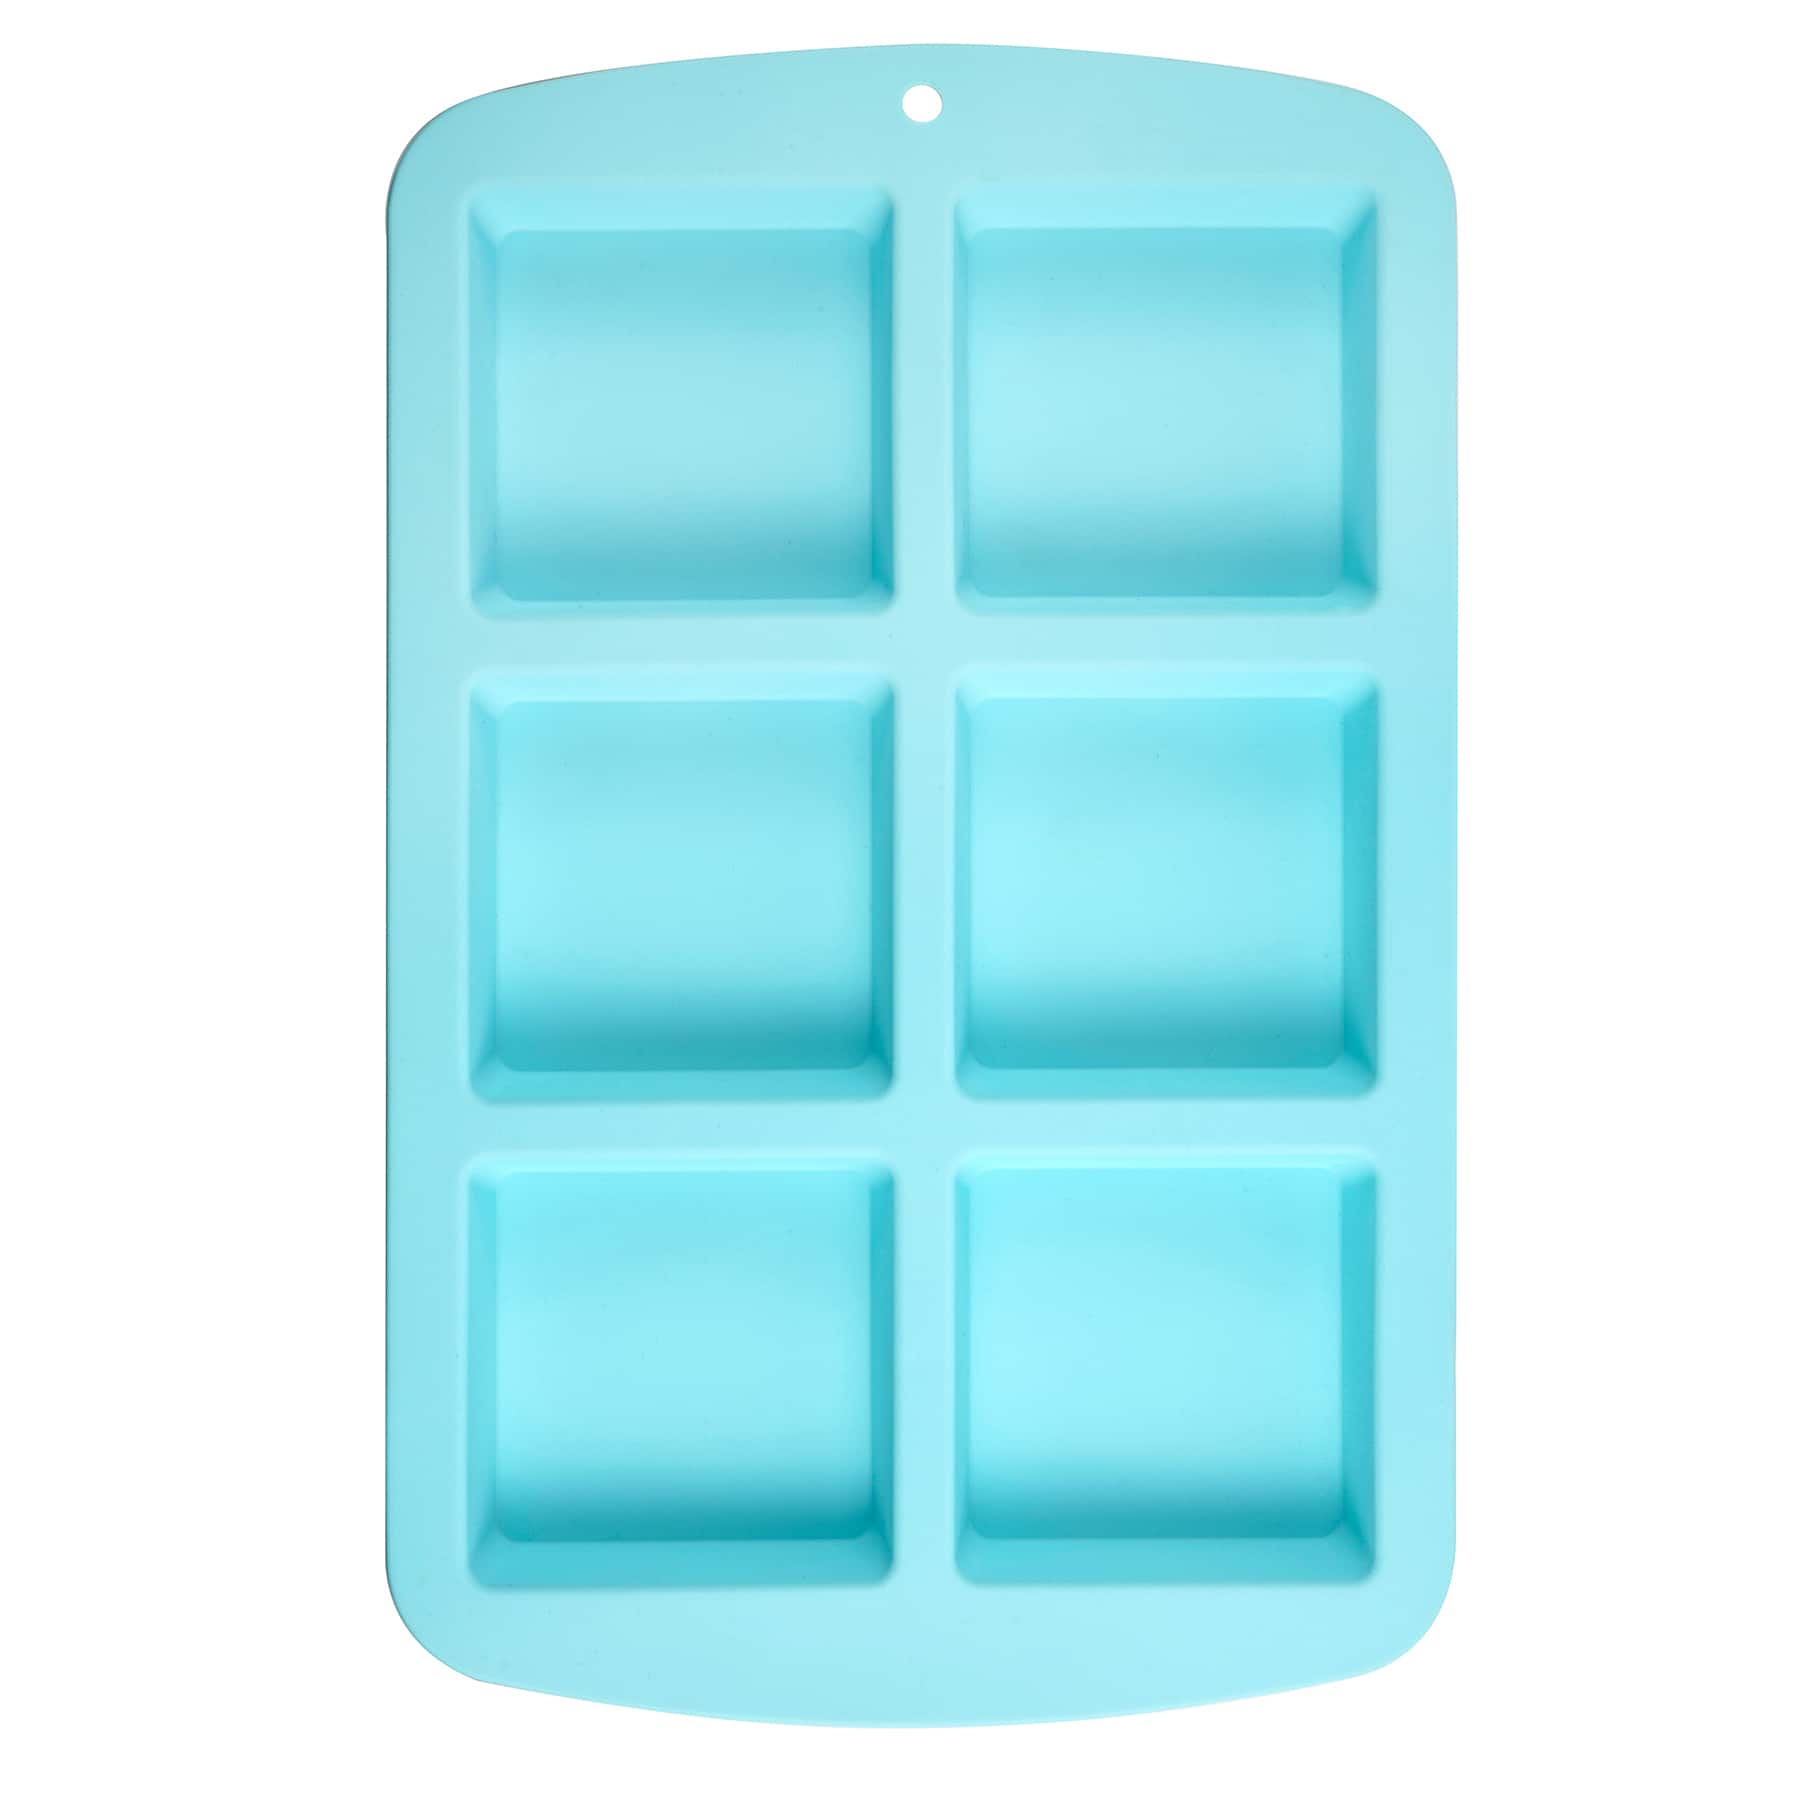 Square Silicone Candy Molds, Total 252 Holes Mini Silicone Molds